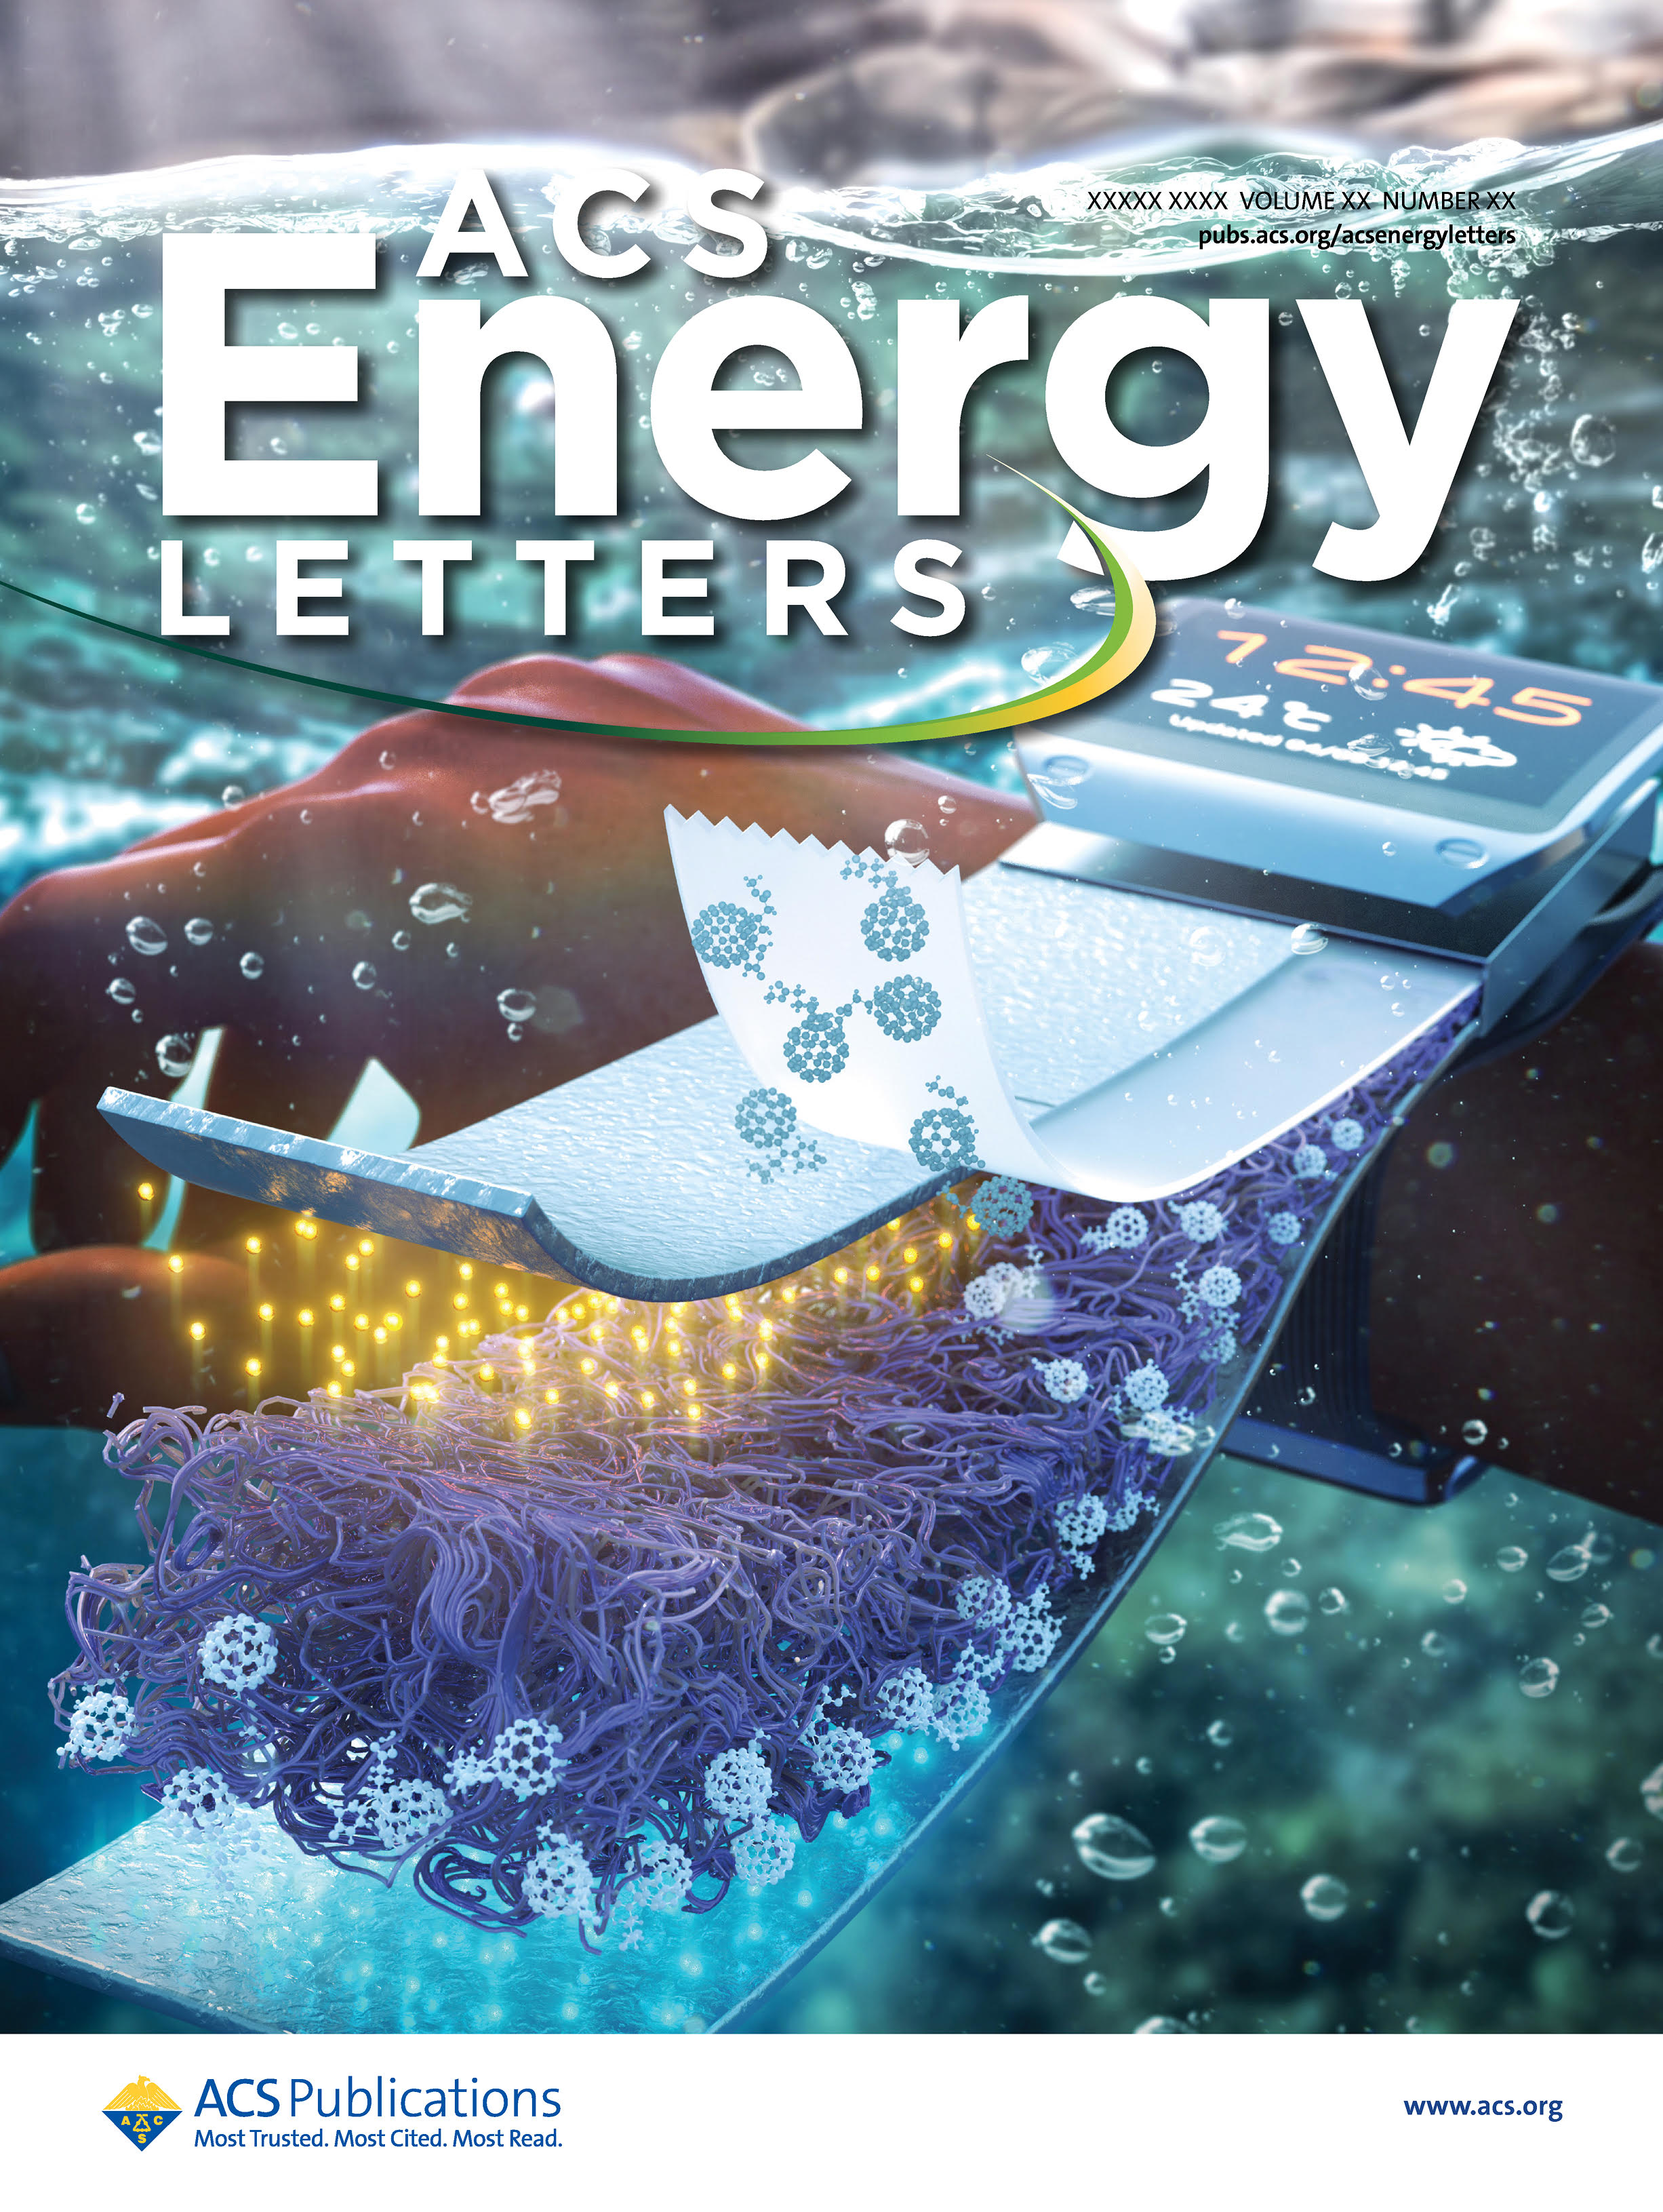 ACS Energy Letters journal cover